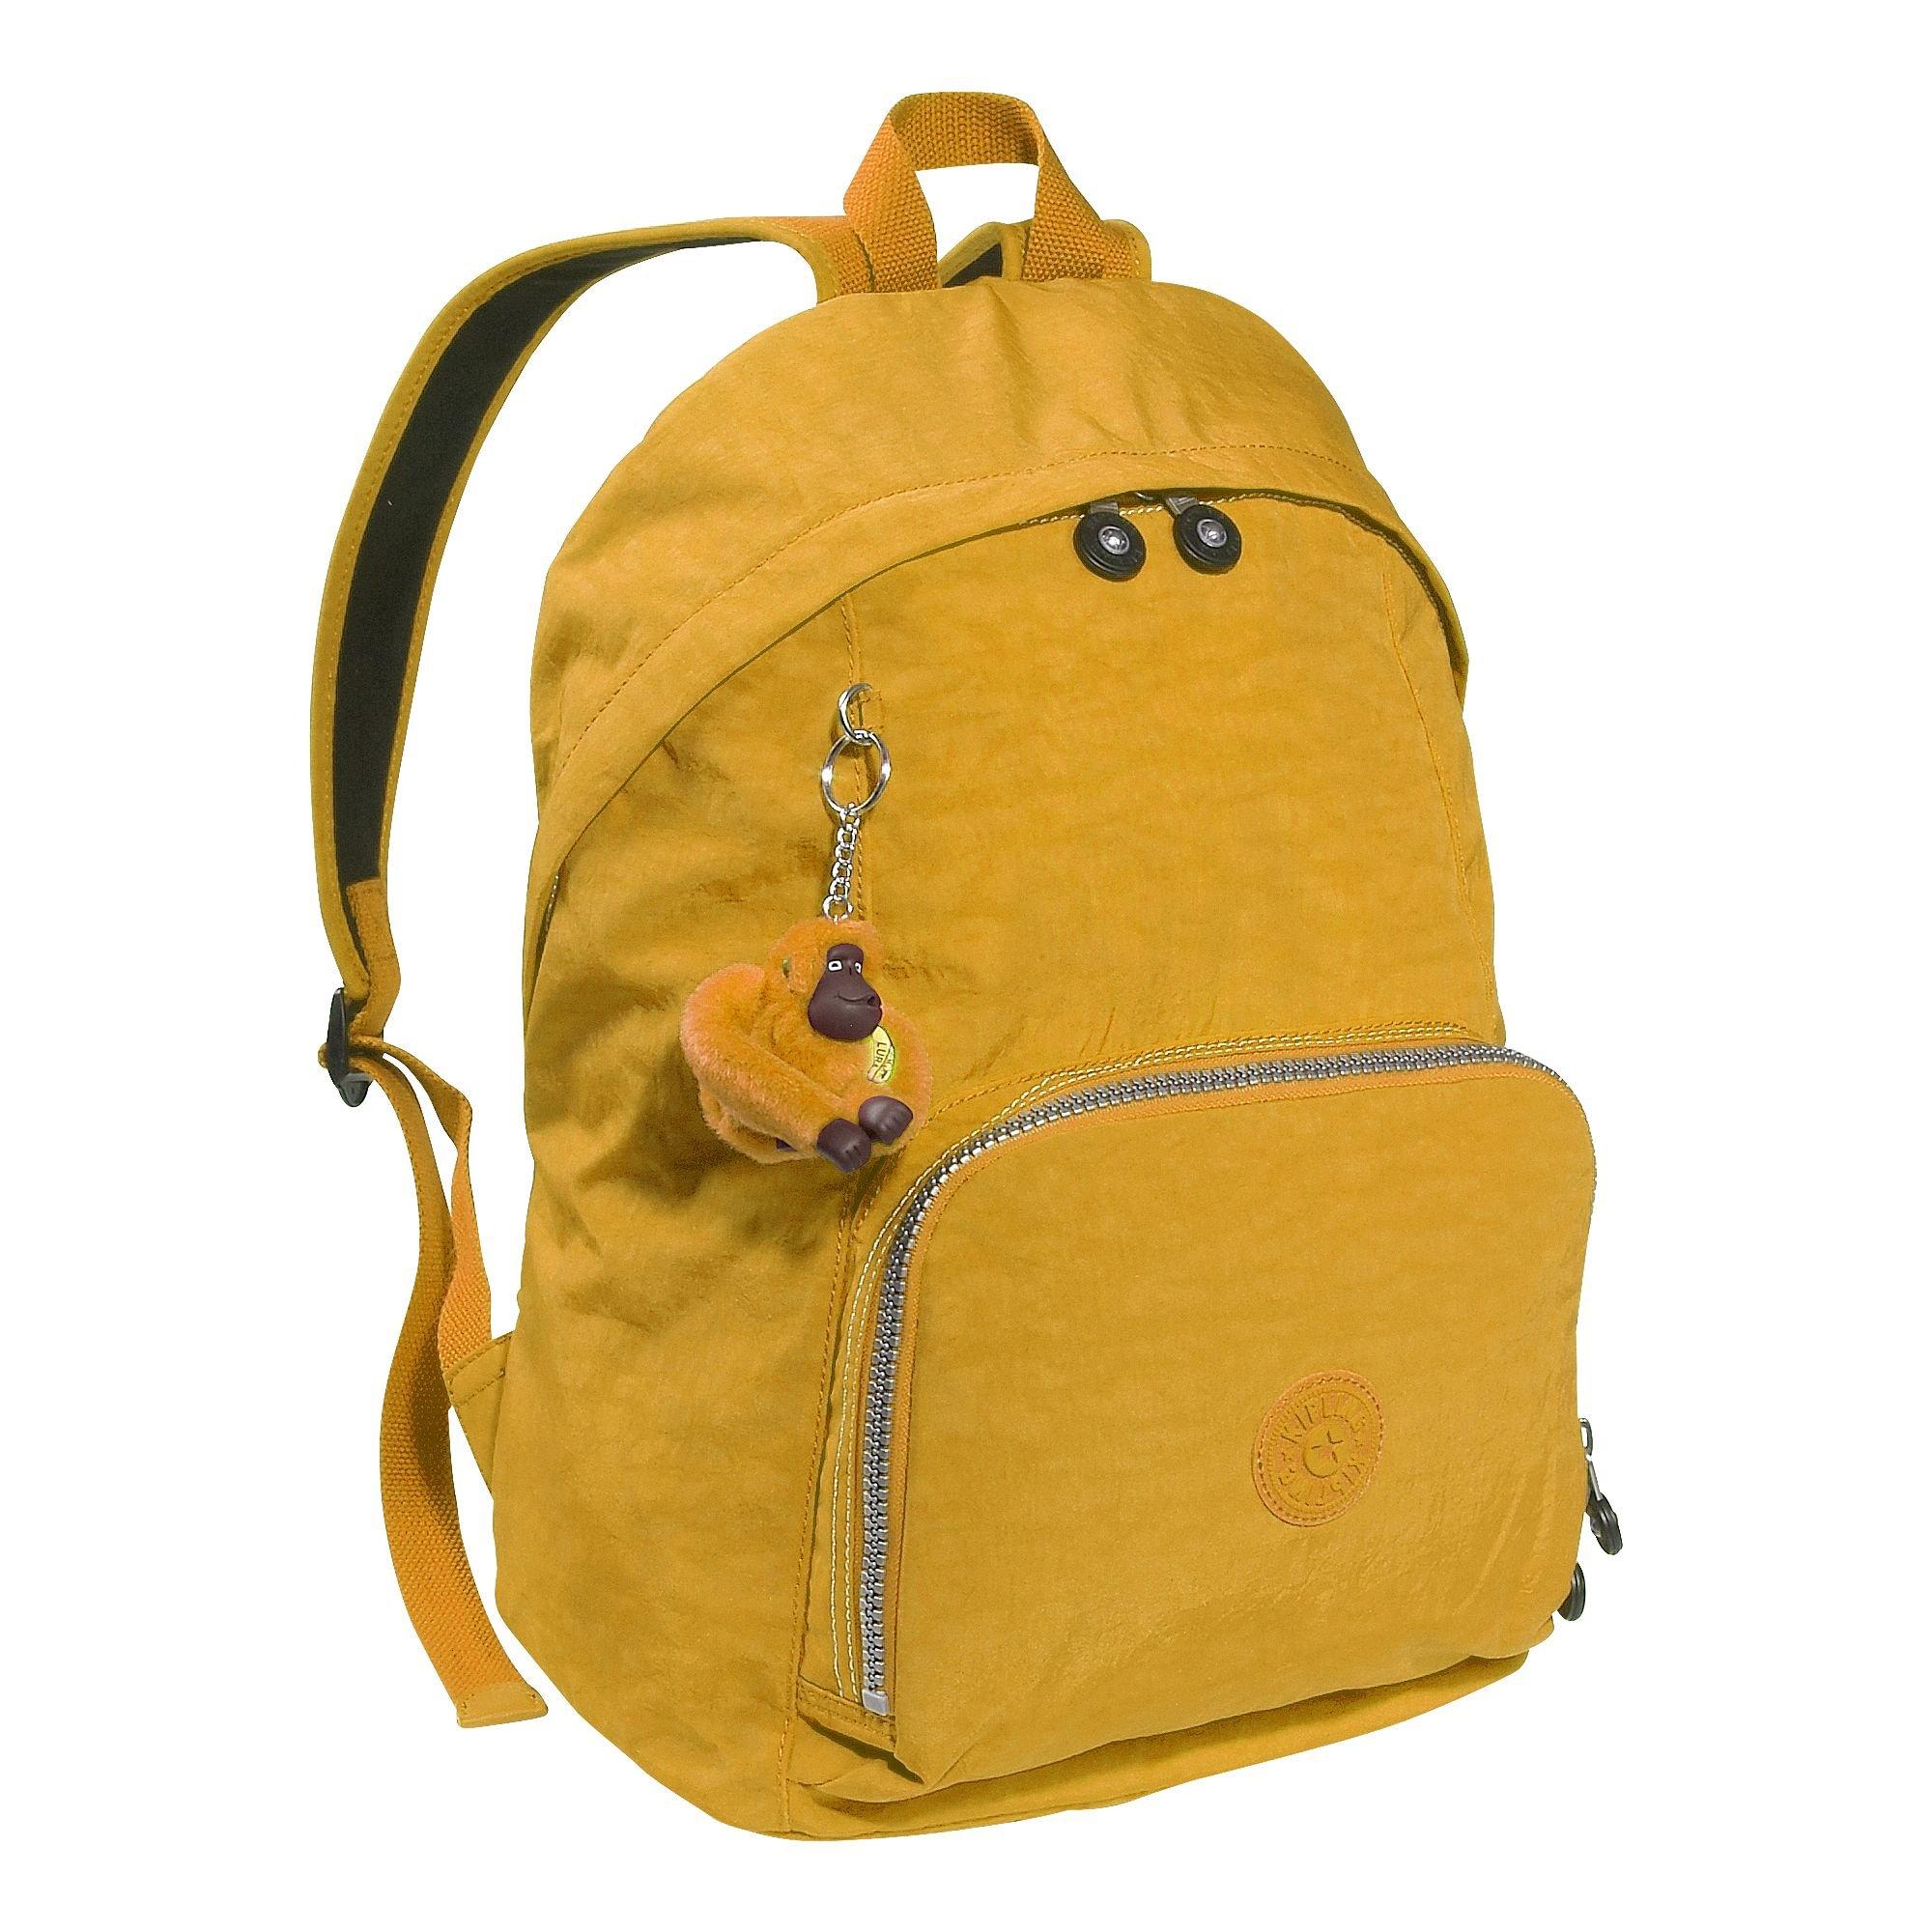 Buy Kipling Products Online at Best Prices | Ubuy India